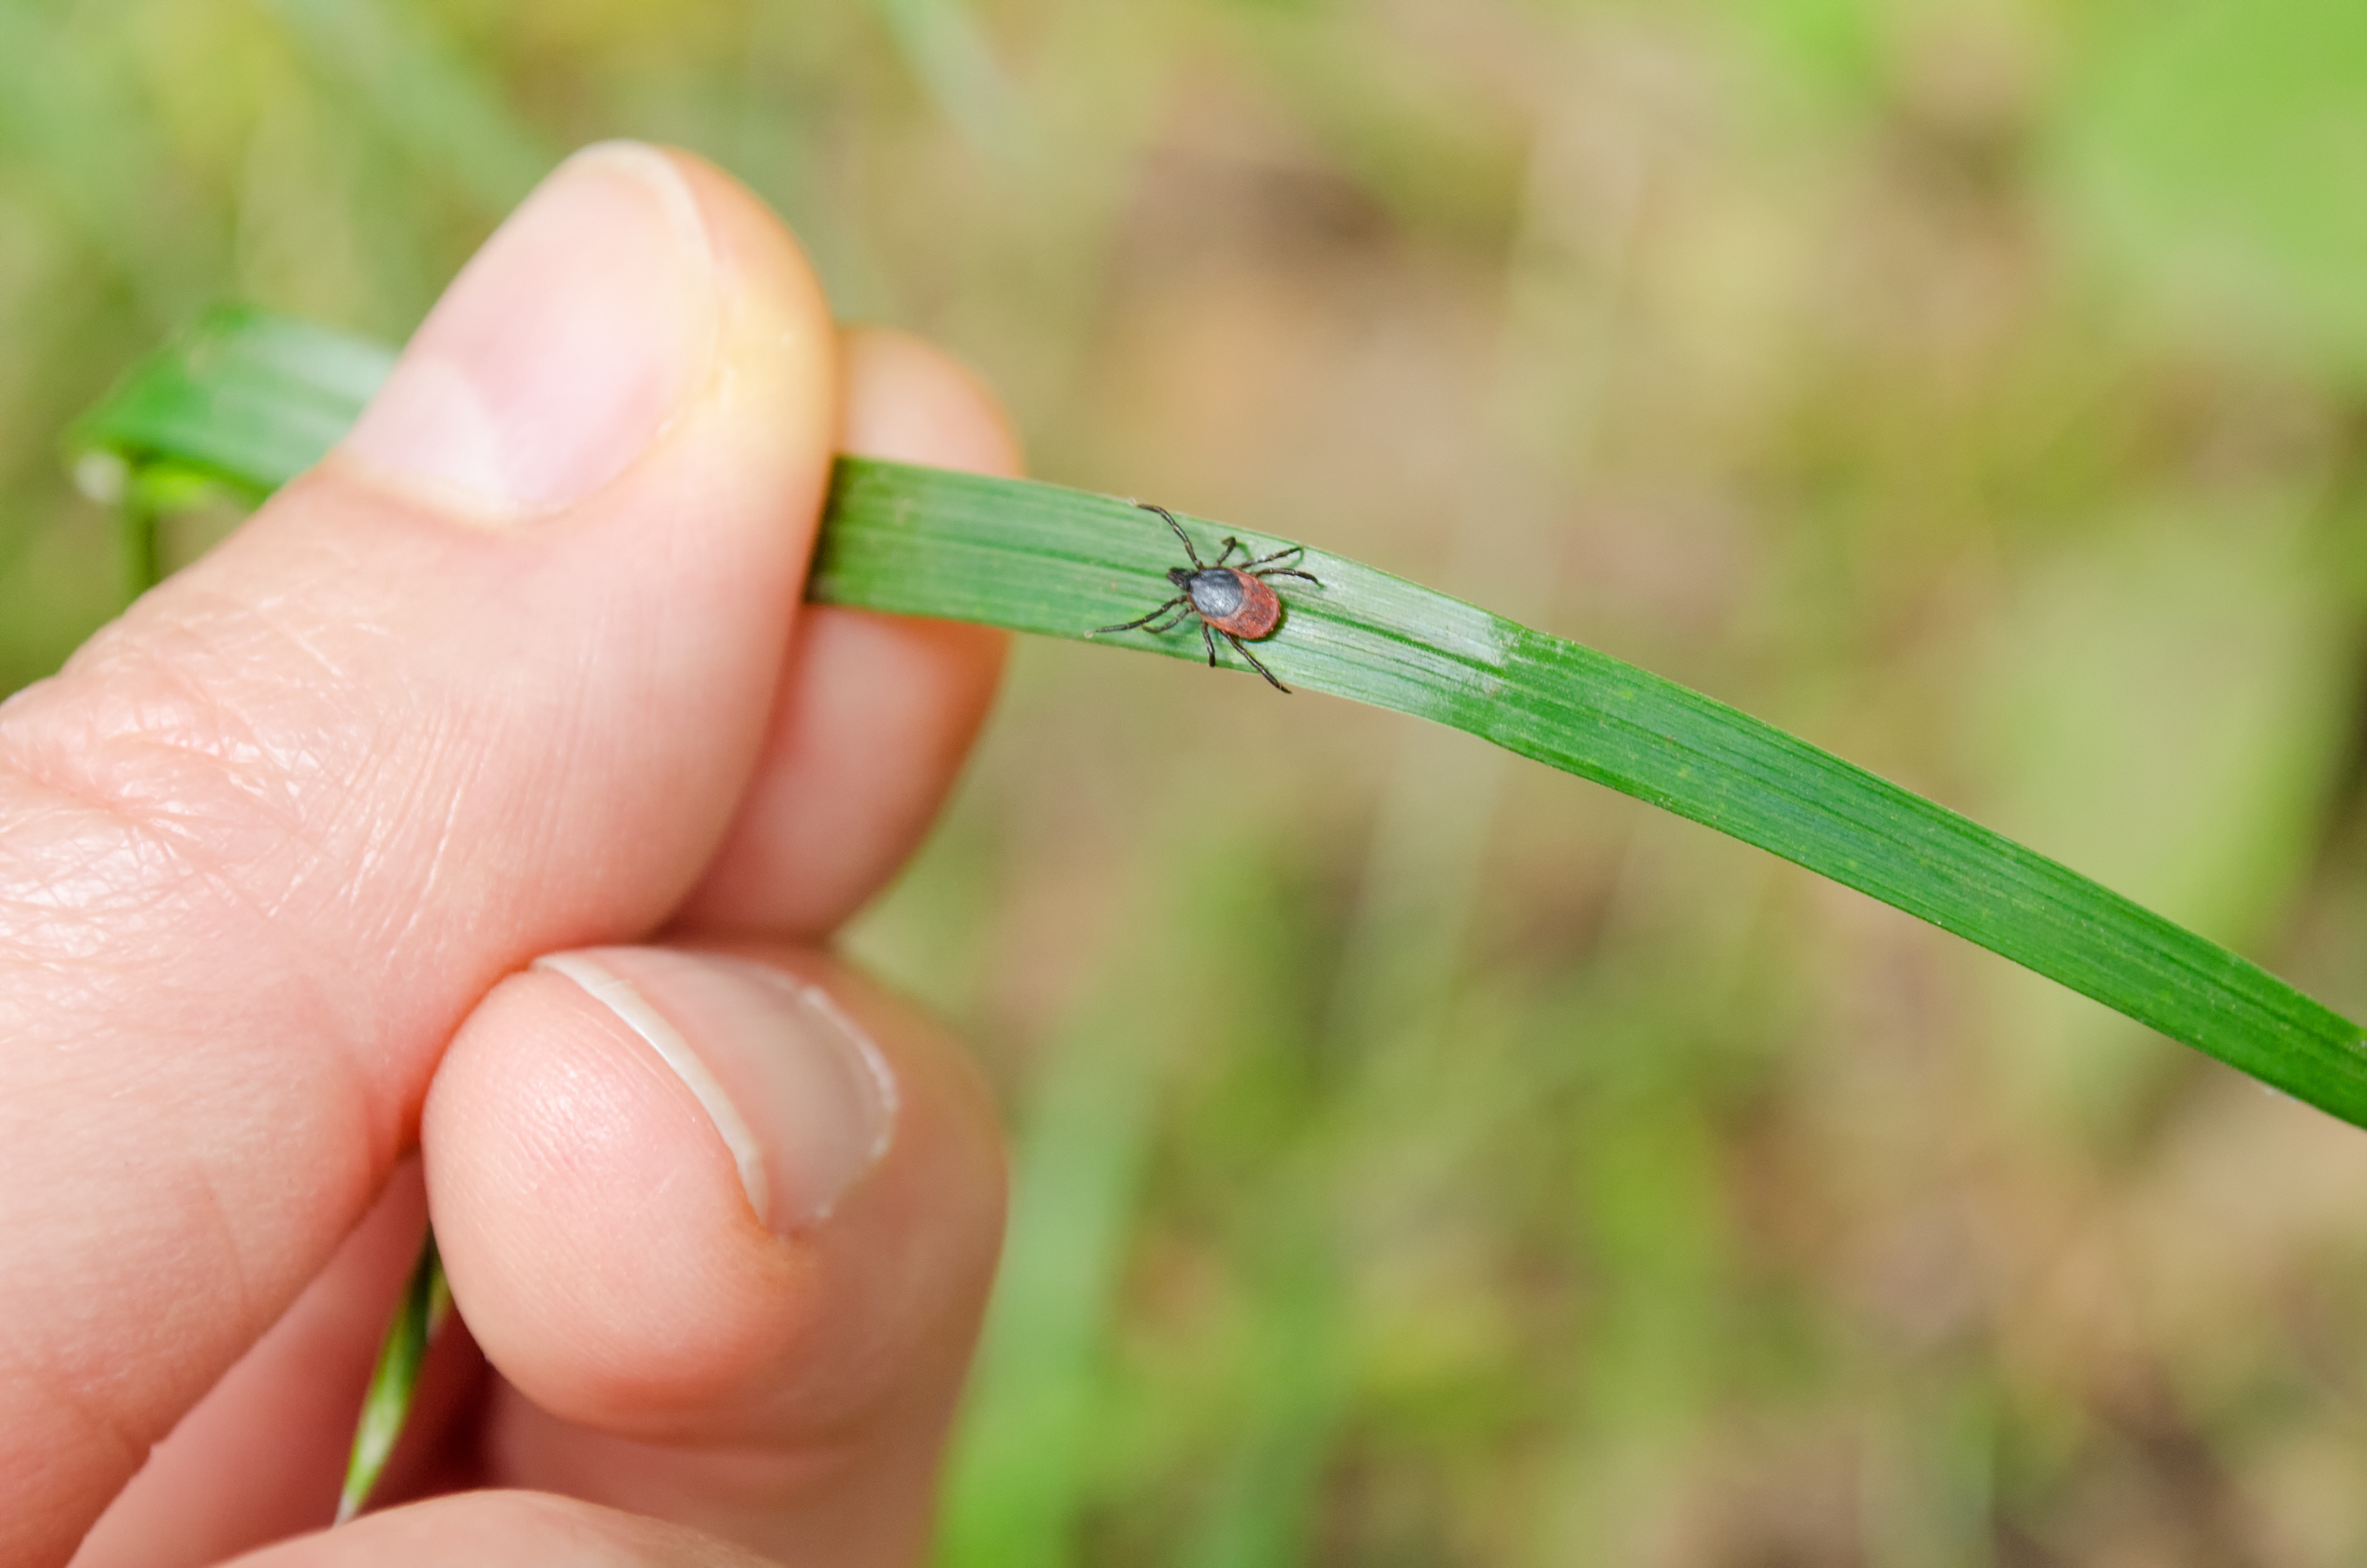 adult tick walking along a long blade of green grass that a person's hand is holding up